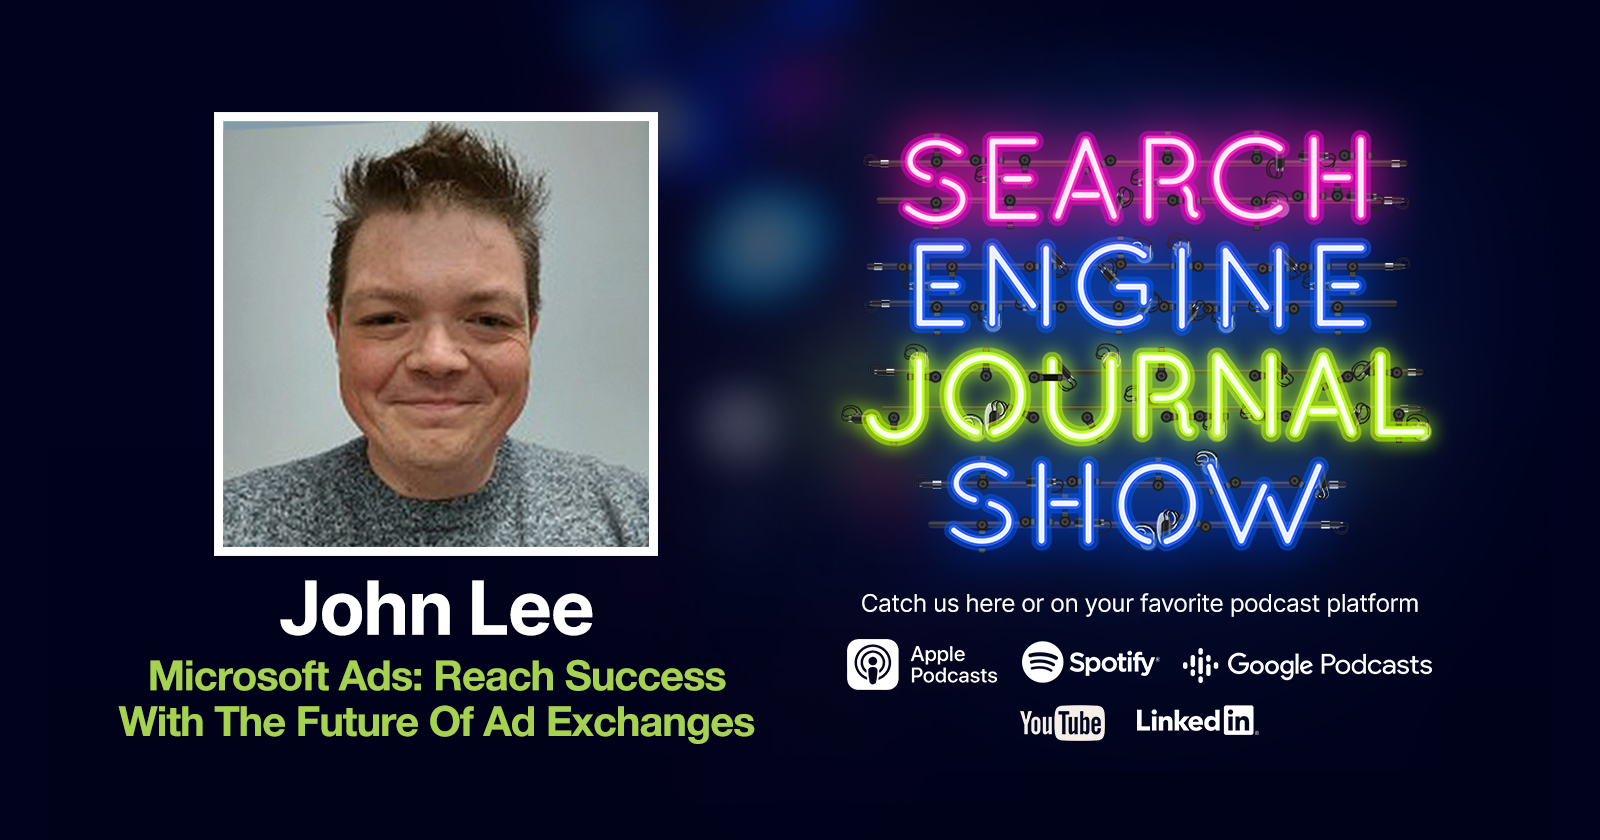 TLD Experimentation & Authority Building with Publishing and SEO [Podcast]